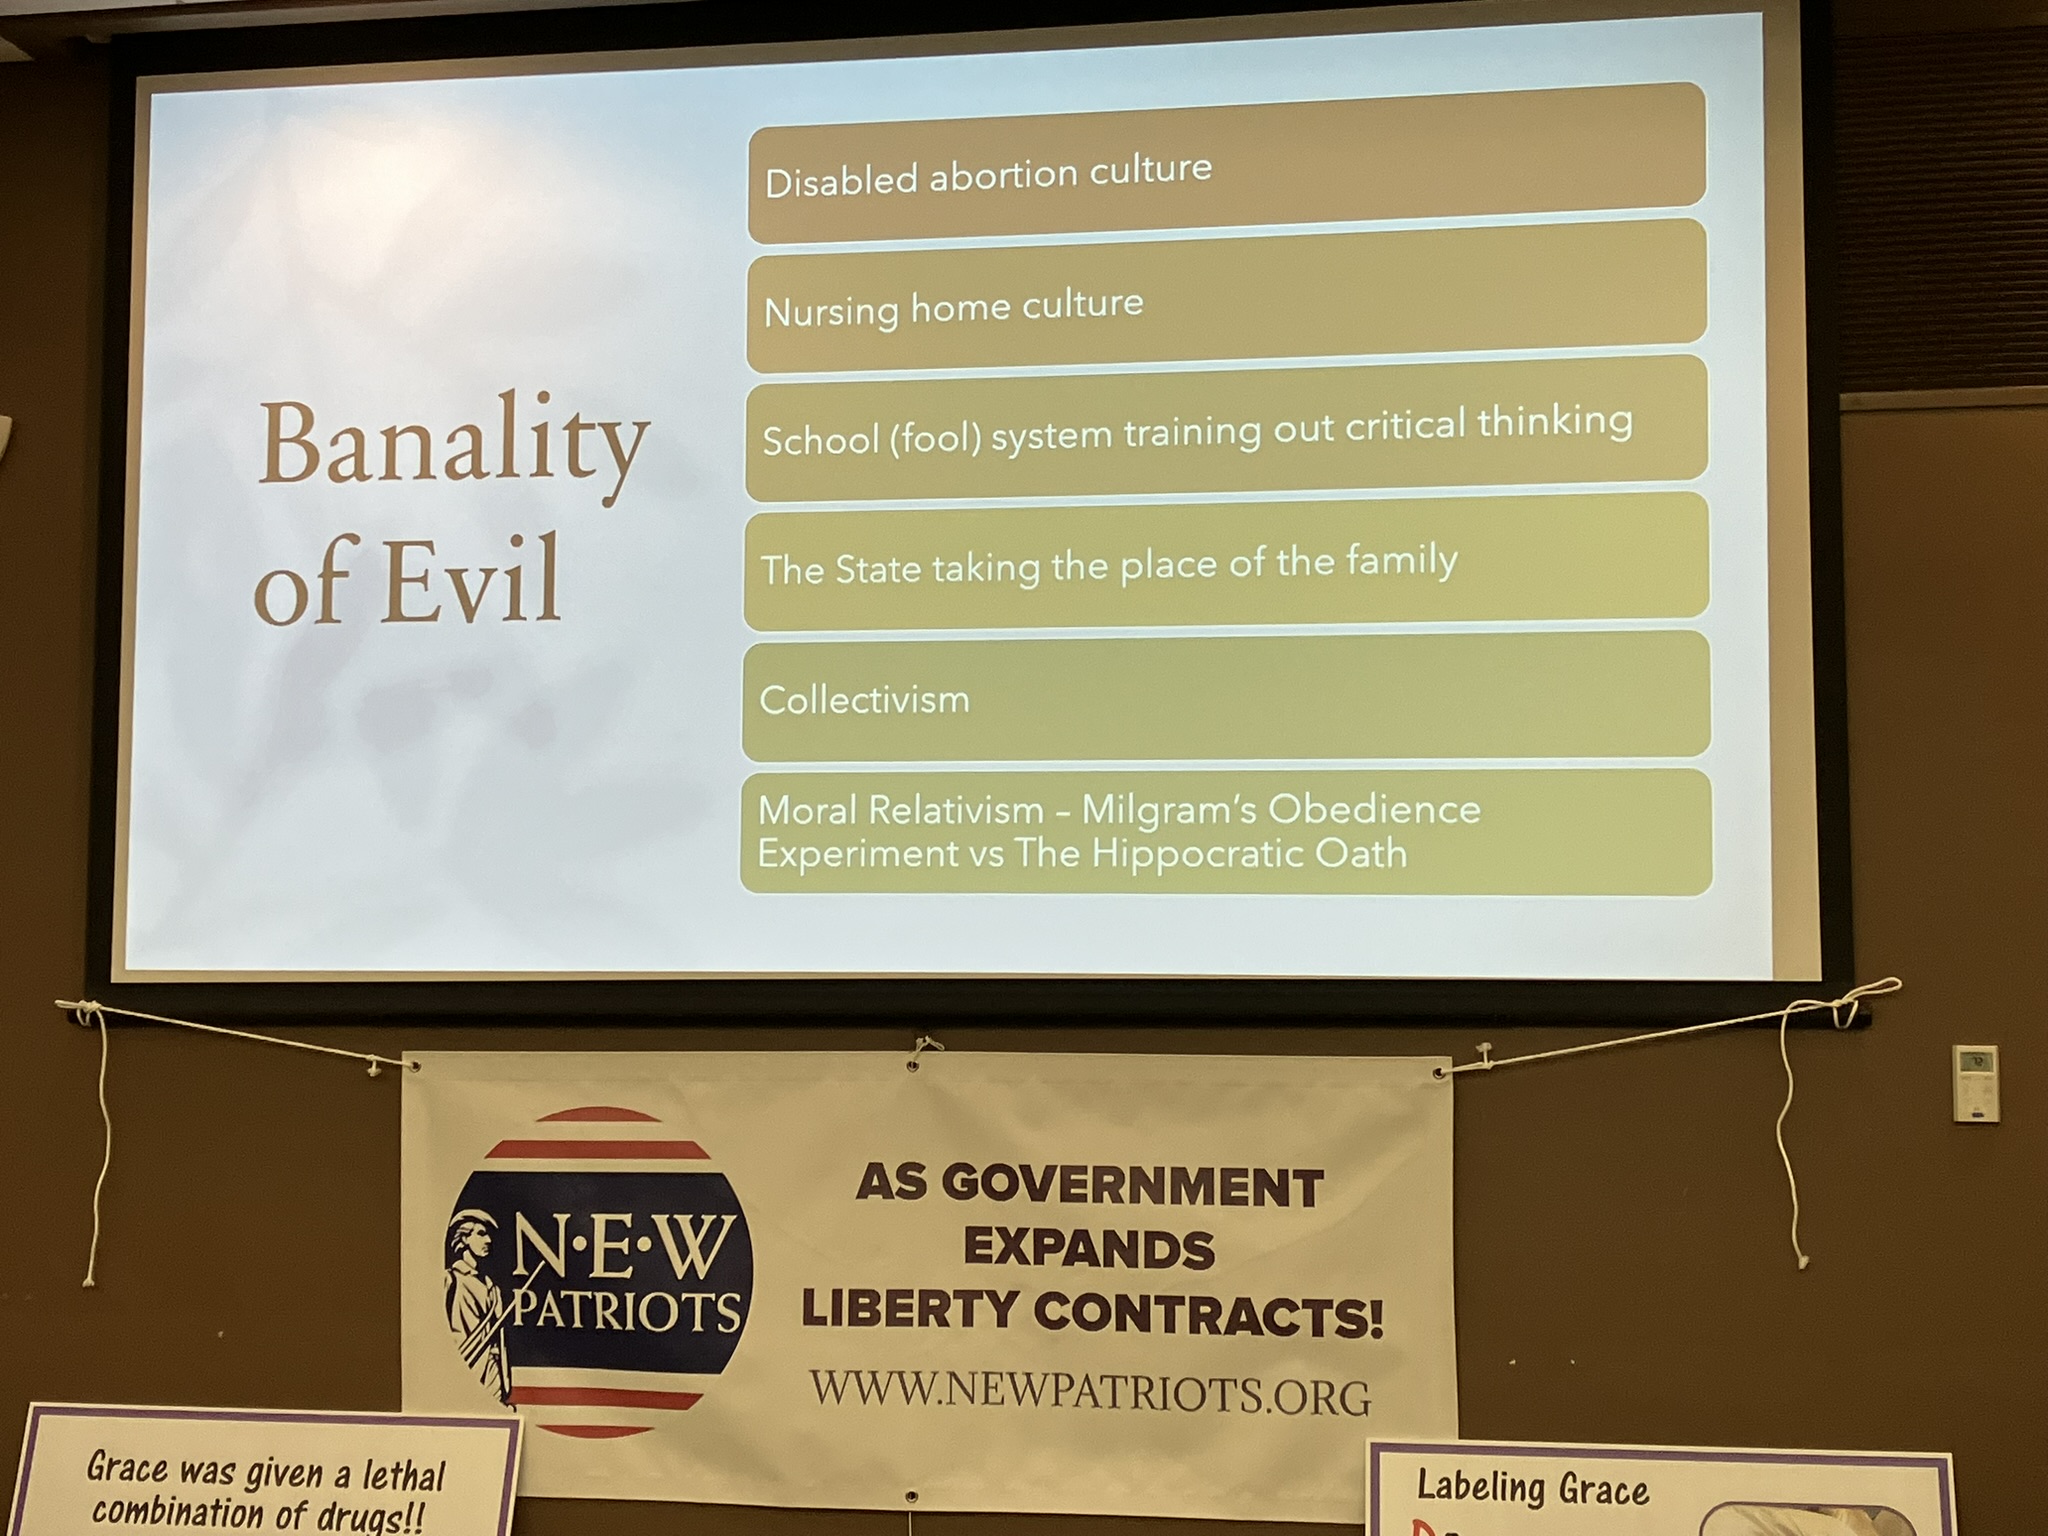 Scott Schara explains how common evil is in our culture today.